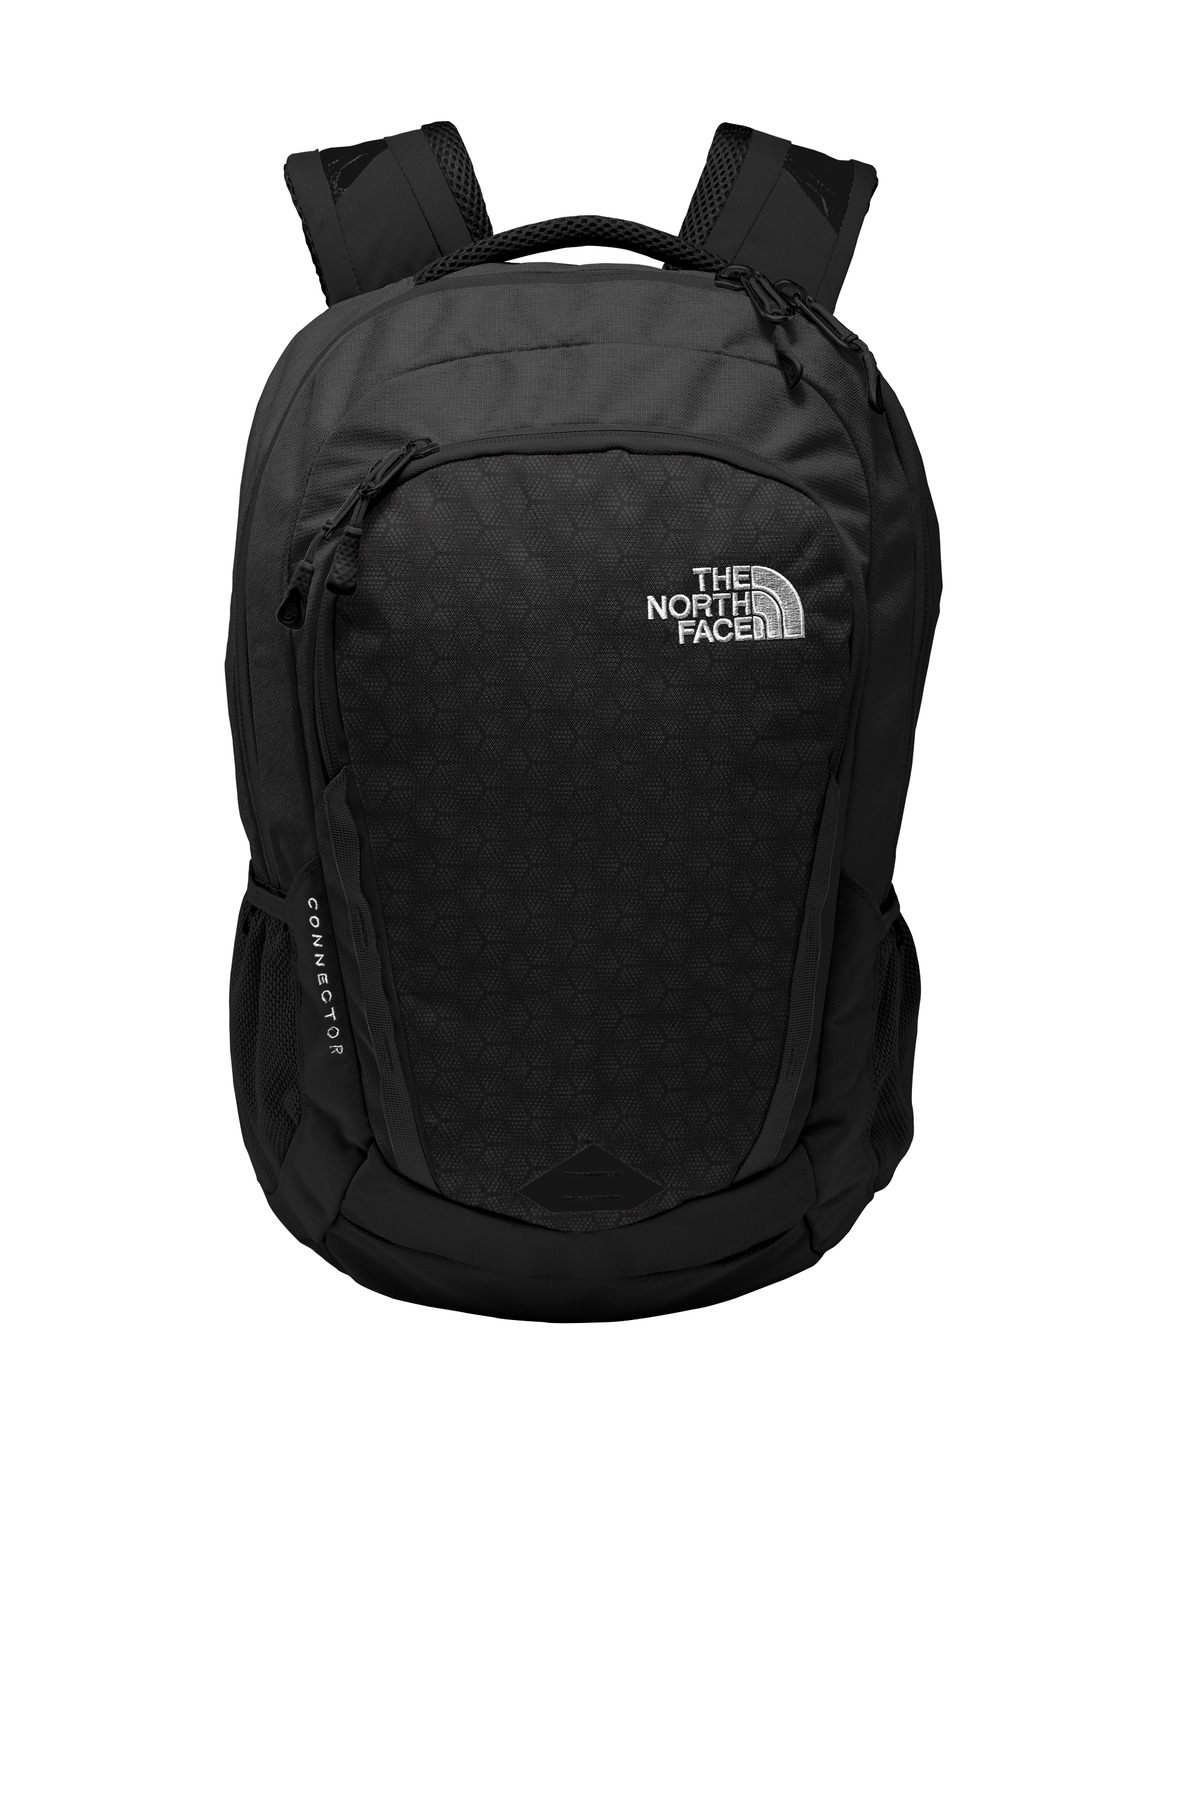 The North Face Connector Backpack-The North Face